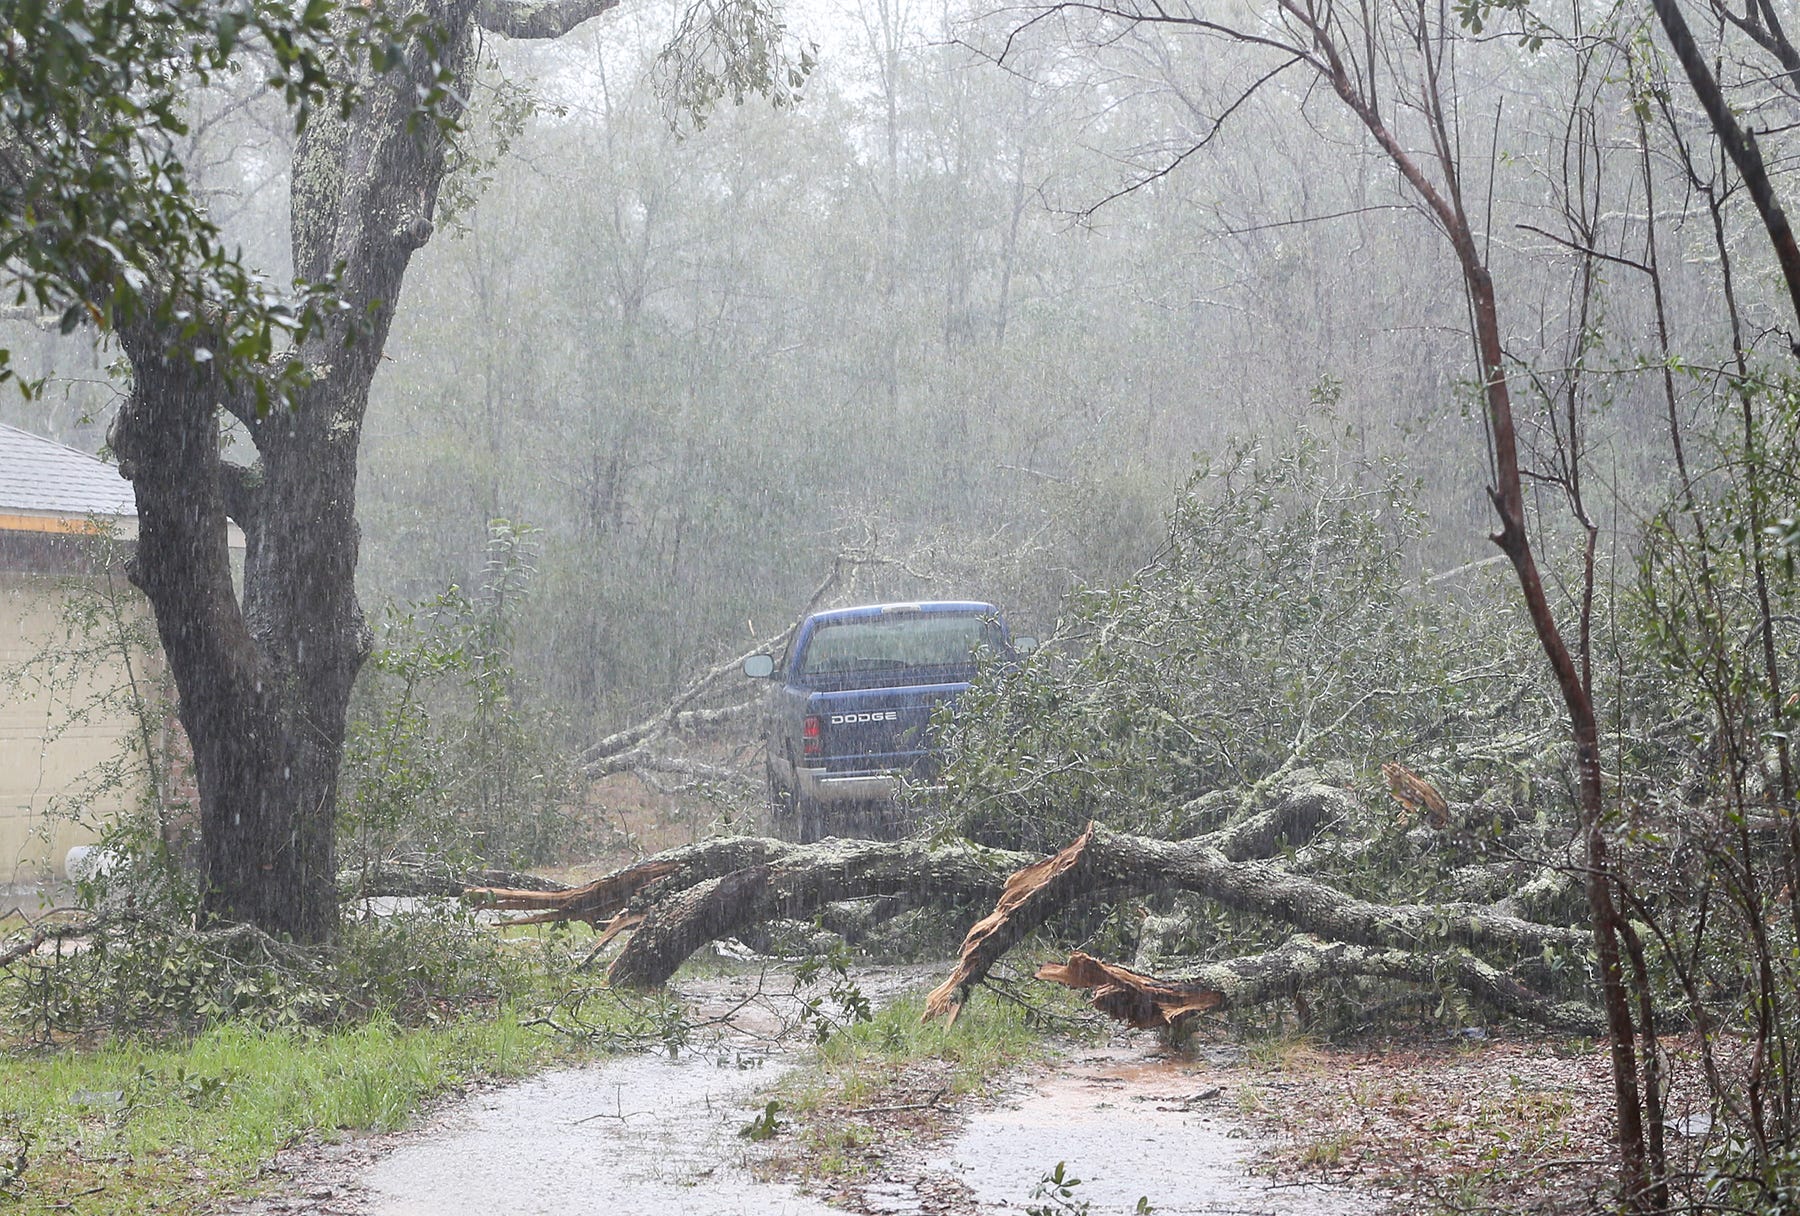 PHOTO: A severe storm caused some home and property damage in Holt, Fla., March 19, 2022.